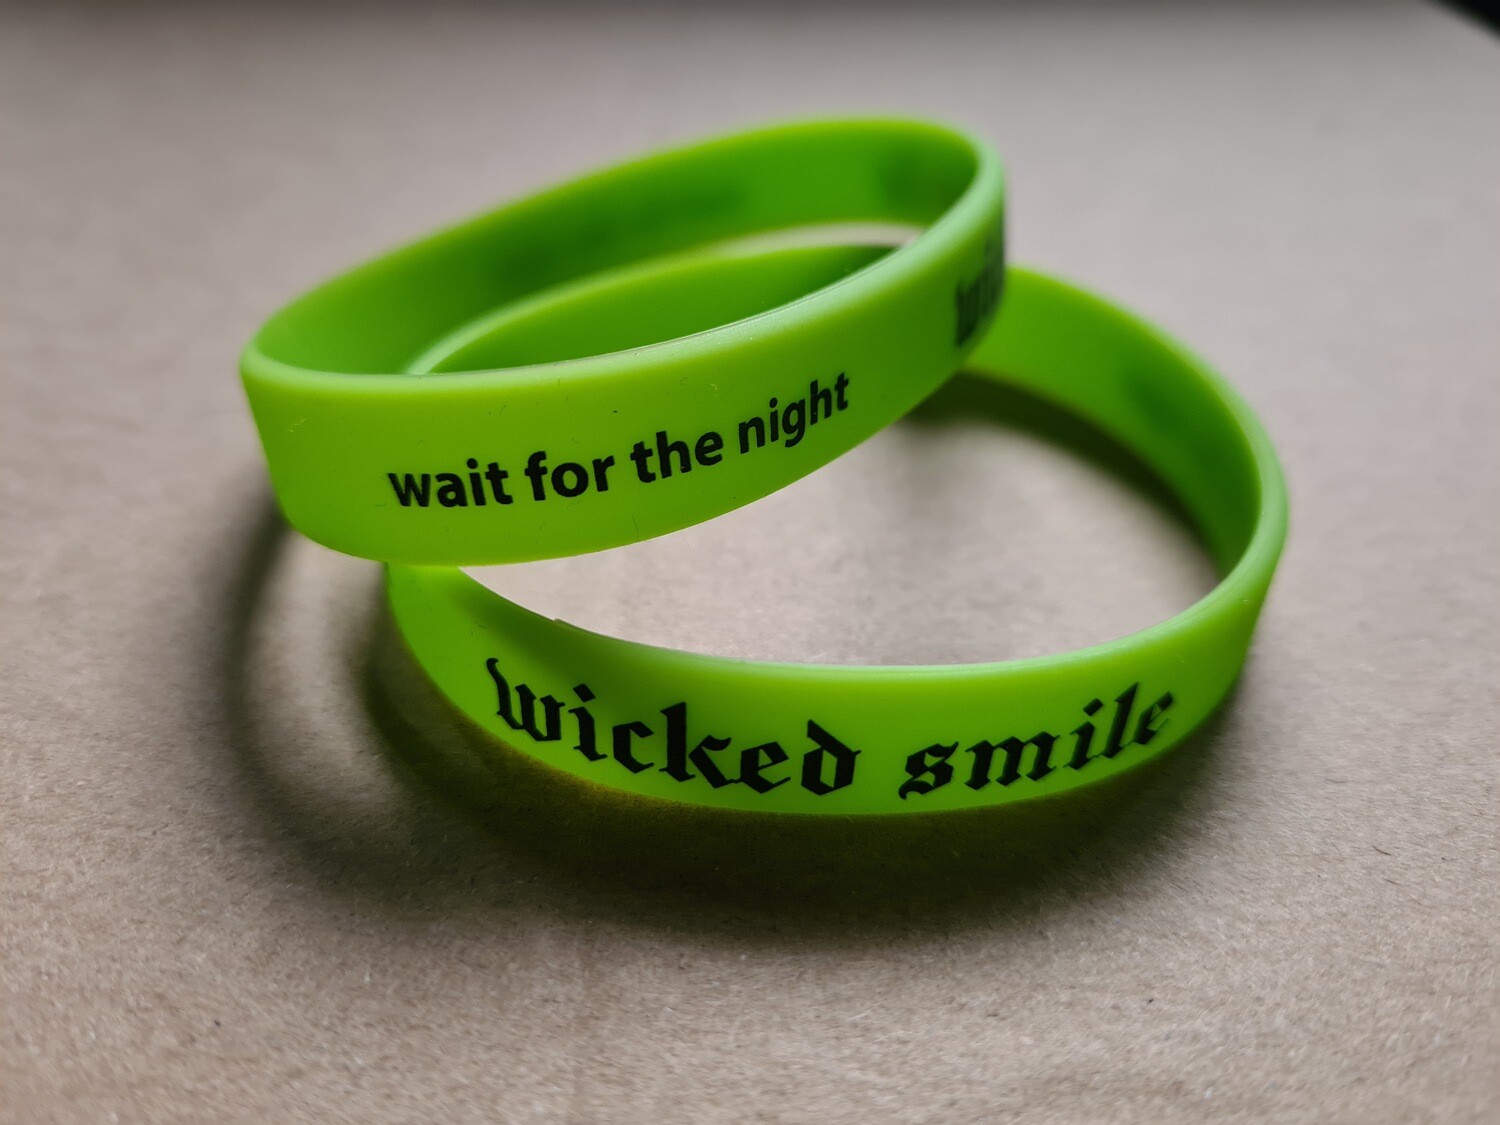 Wicked Smile Wait For The Night wristband